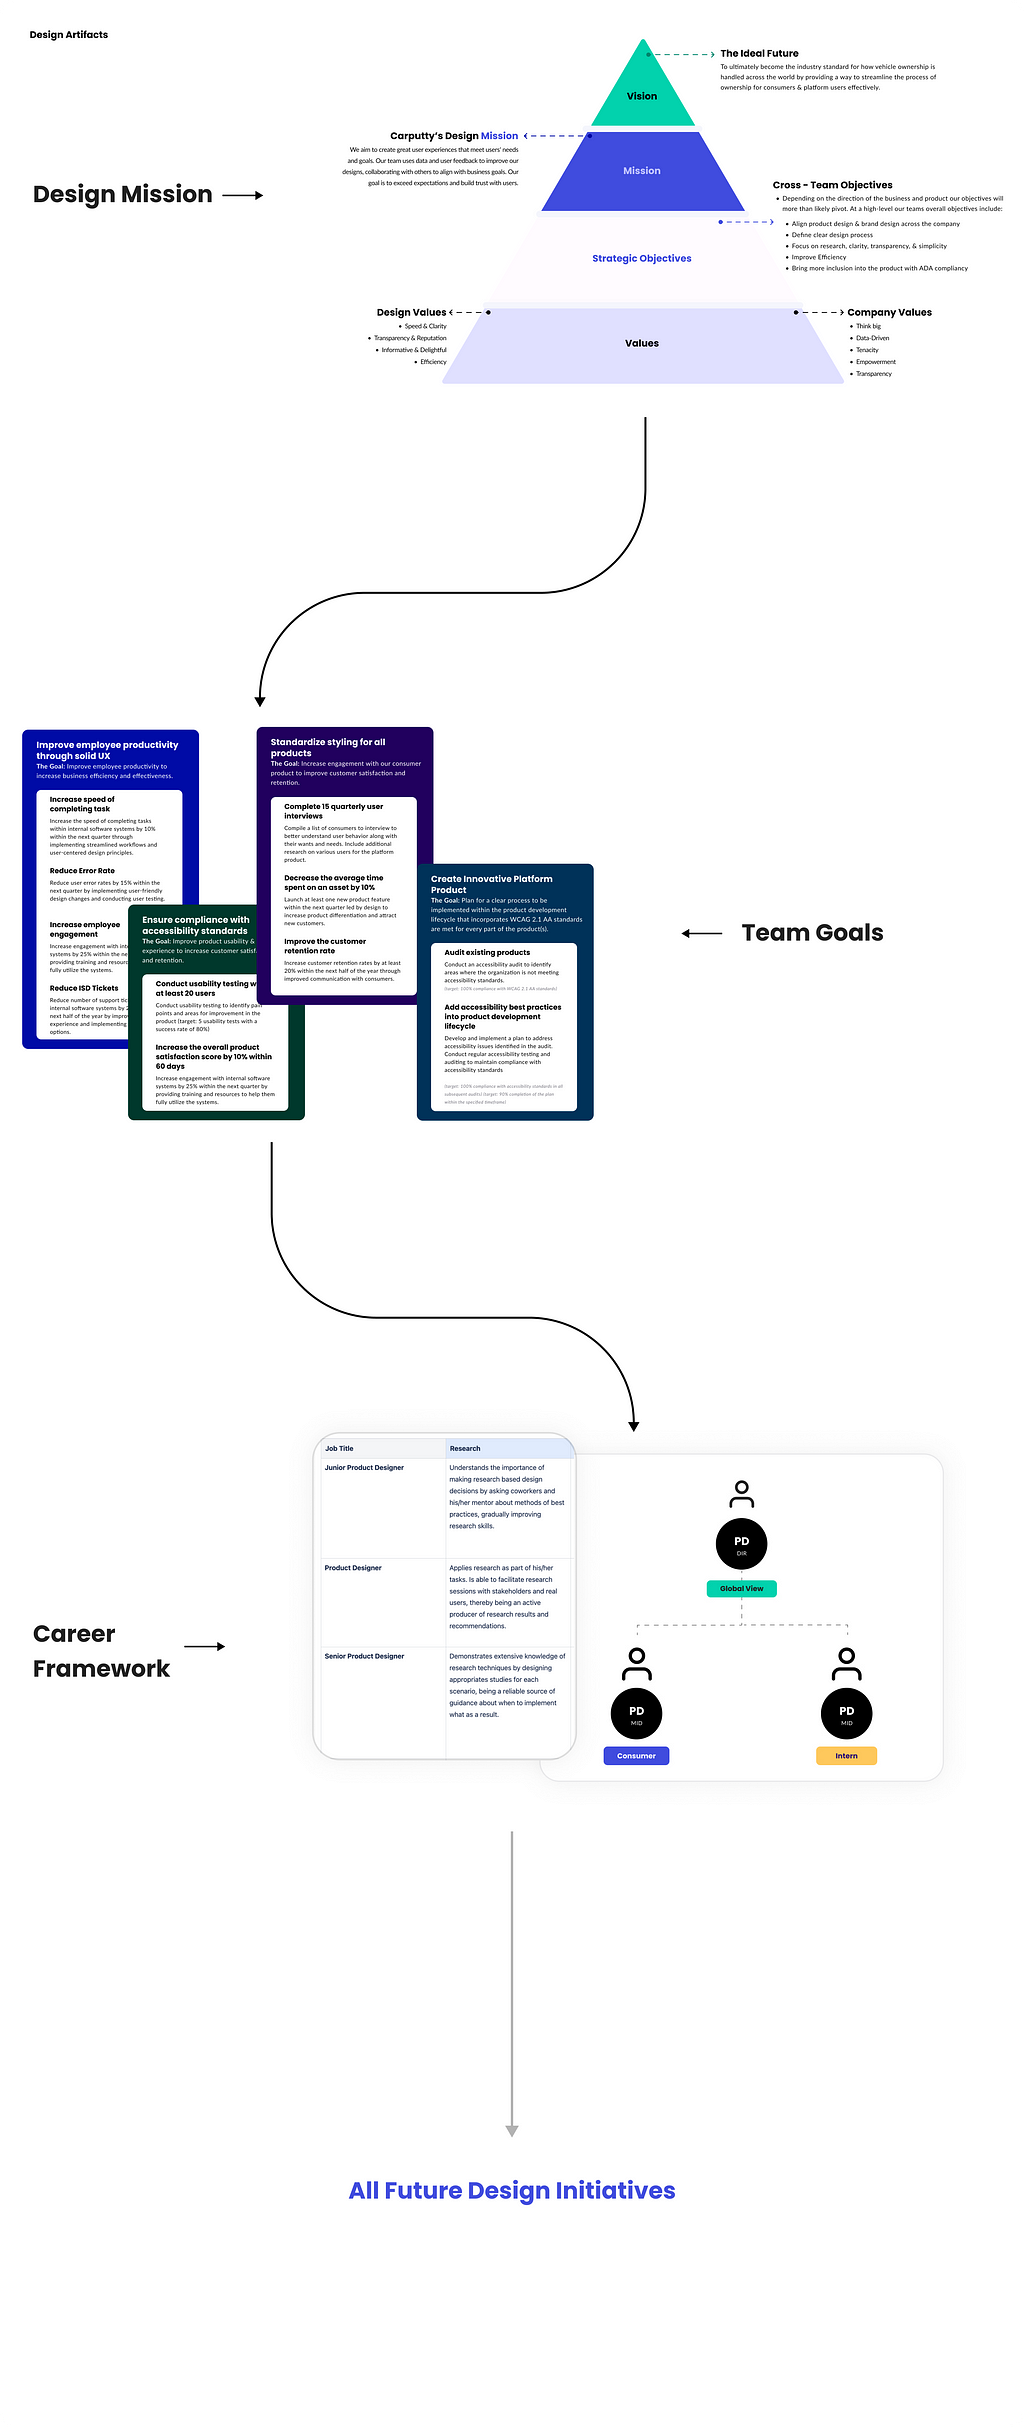 This image showcases clips of how the Carputty design team deals with process. This image starts with a view of the Carputty Product Design teams vision, mission, strategic objectives, and overall values. The document than goes into an overview of the design teams OKR’s presented as team goals, a soft-design team career framework, and ending with an area open for interpretation for all future design initiatives.